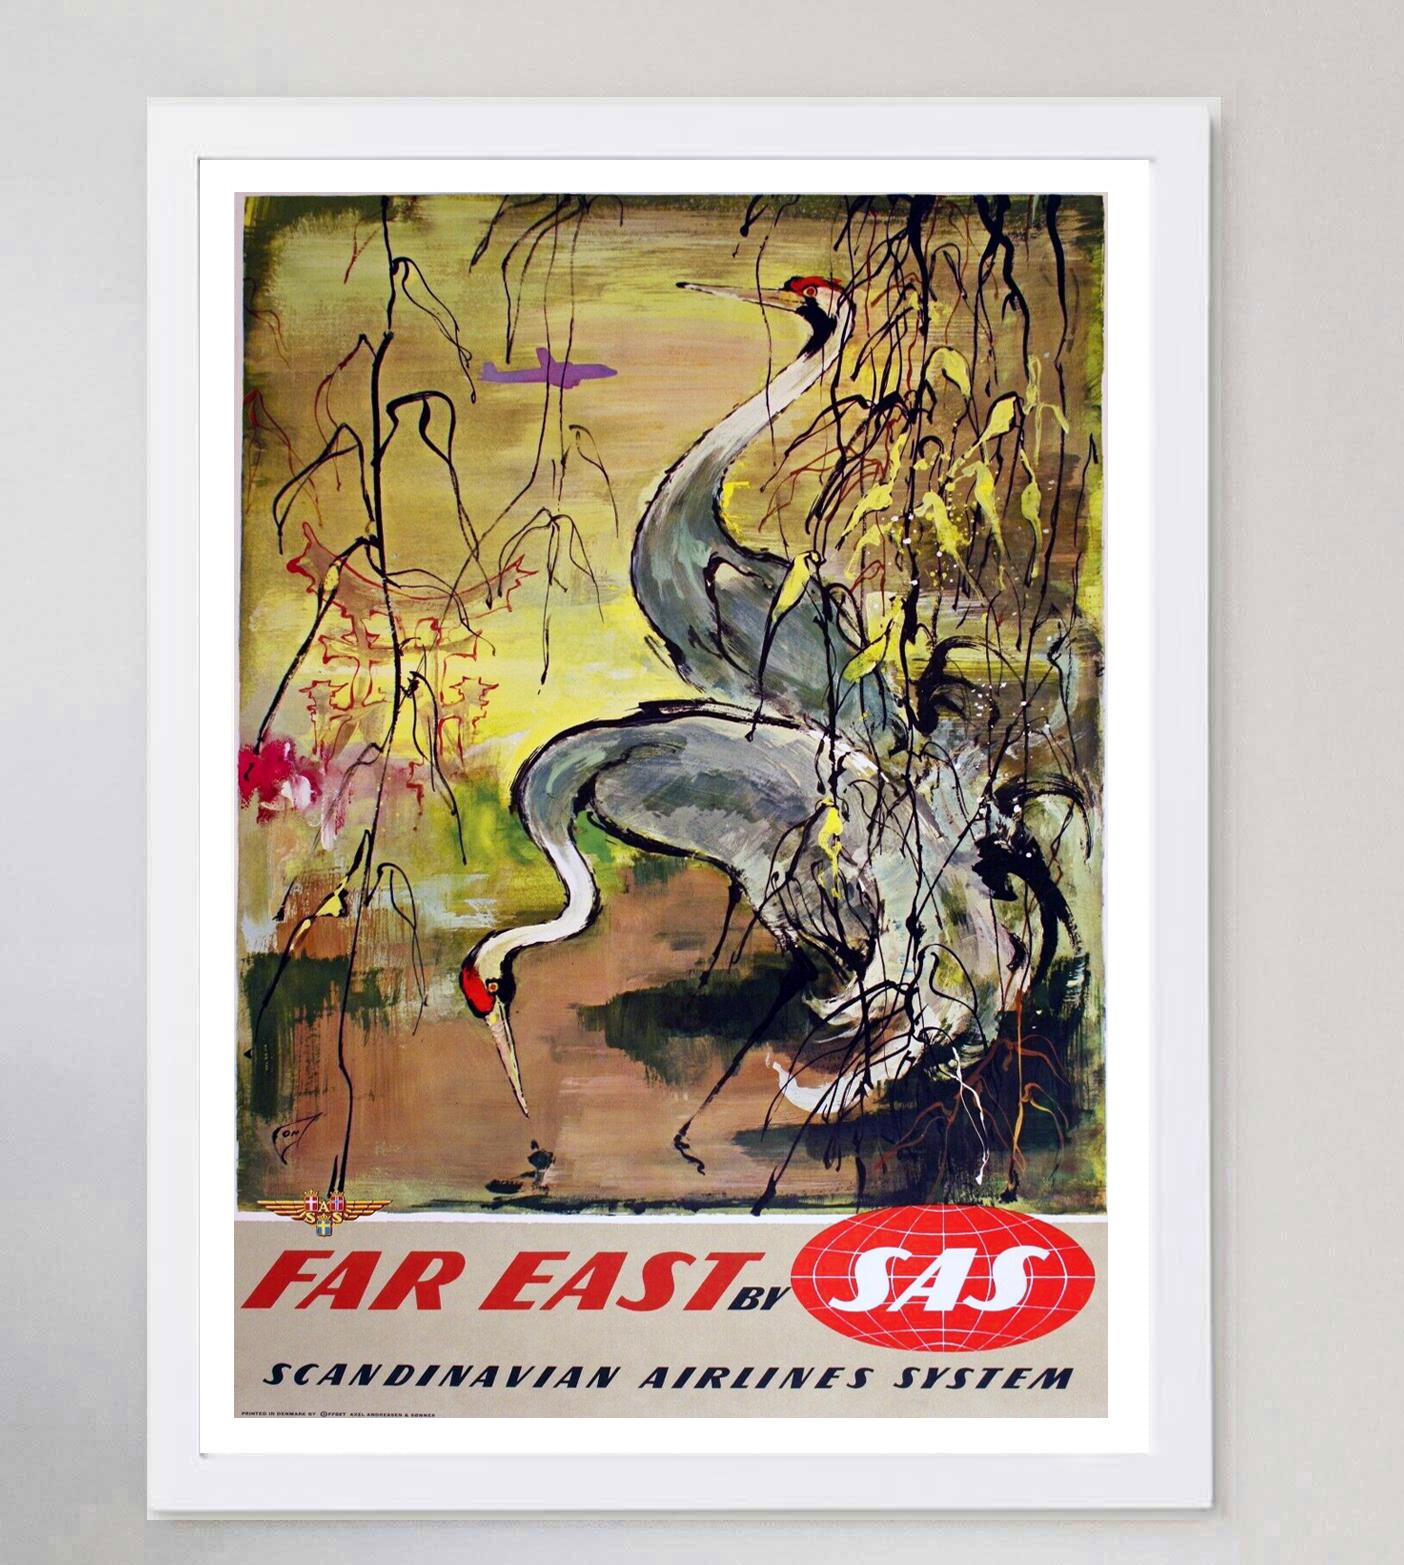 1955 Scandinavian Airlines System - Far East by SAS Original Vintage Poster In Good Condition For Sale In Winchester, GB